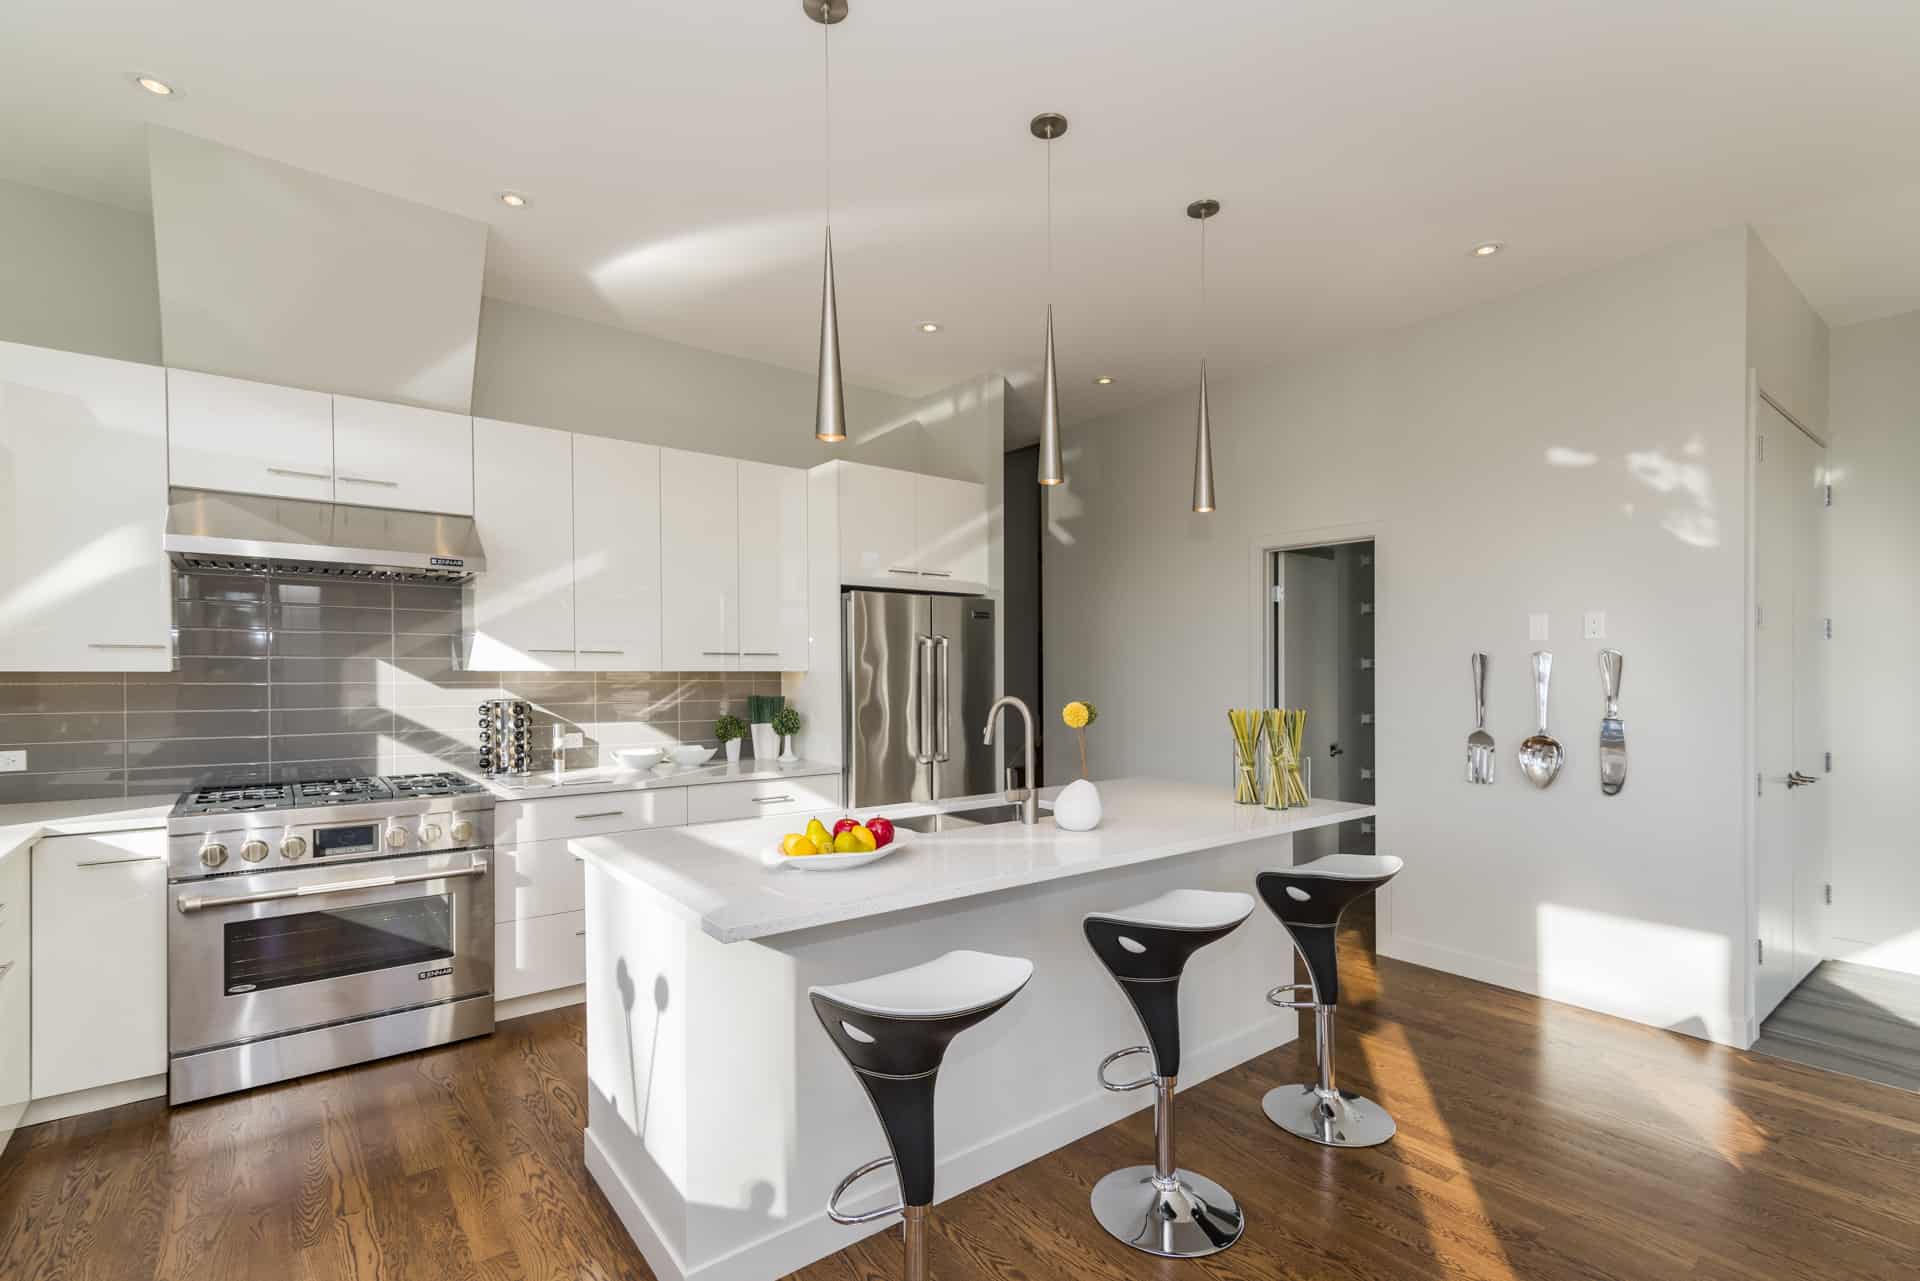 High-Tech Haven: Integrating Smart Home Technology in Your Kitchen Remodel